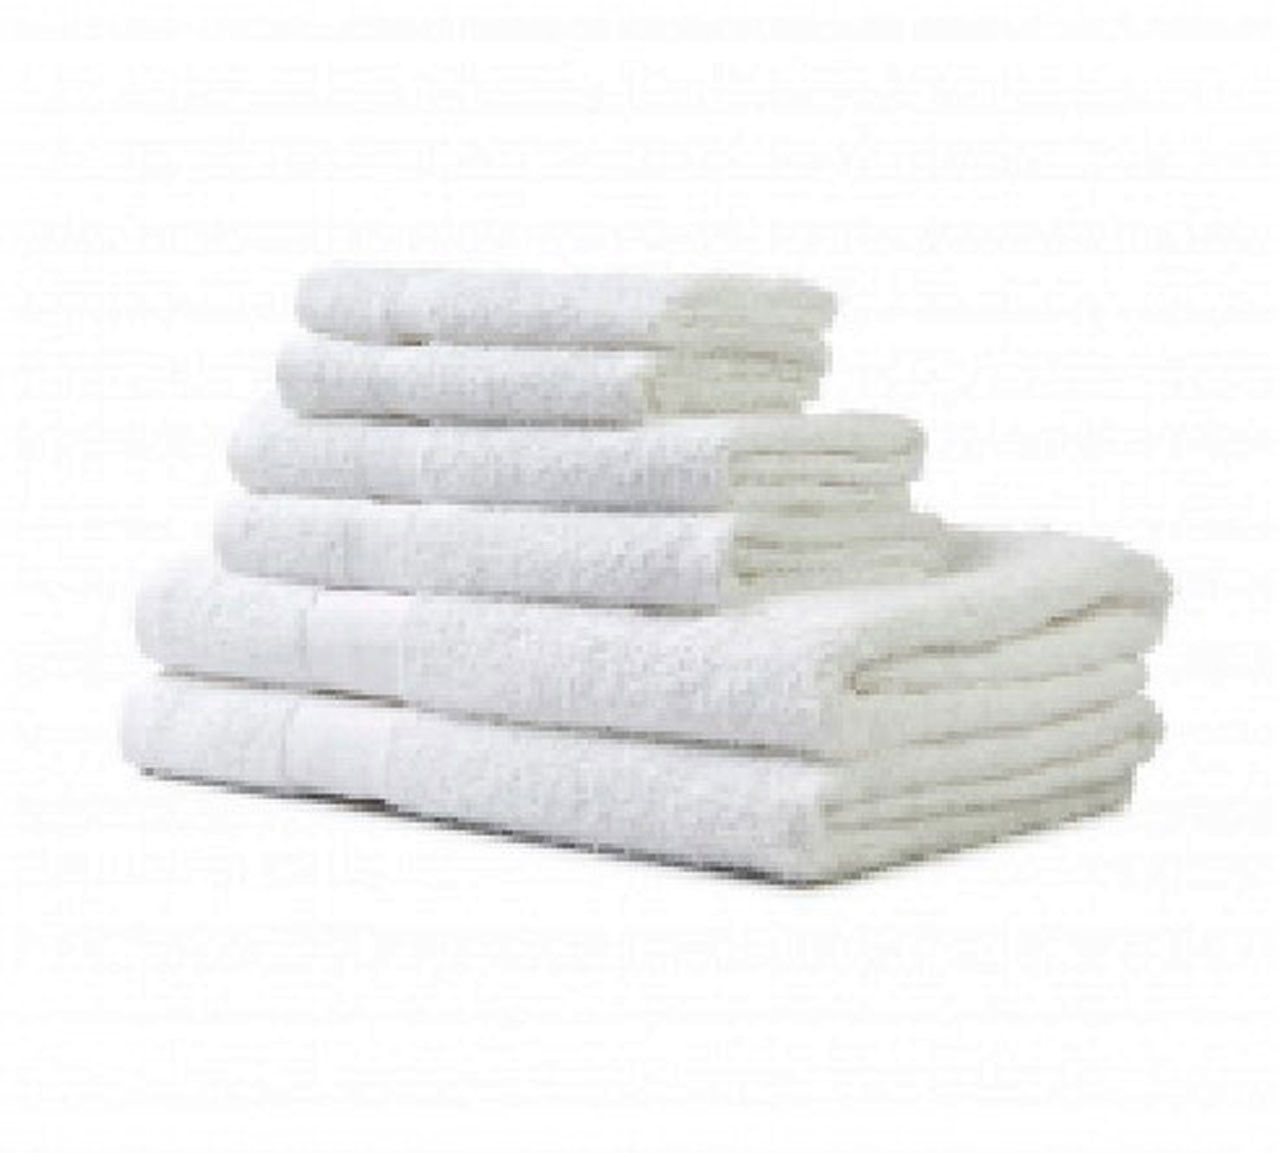 Is the golden jewel blend towel set reasonably priced?